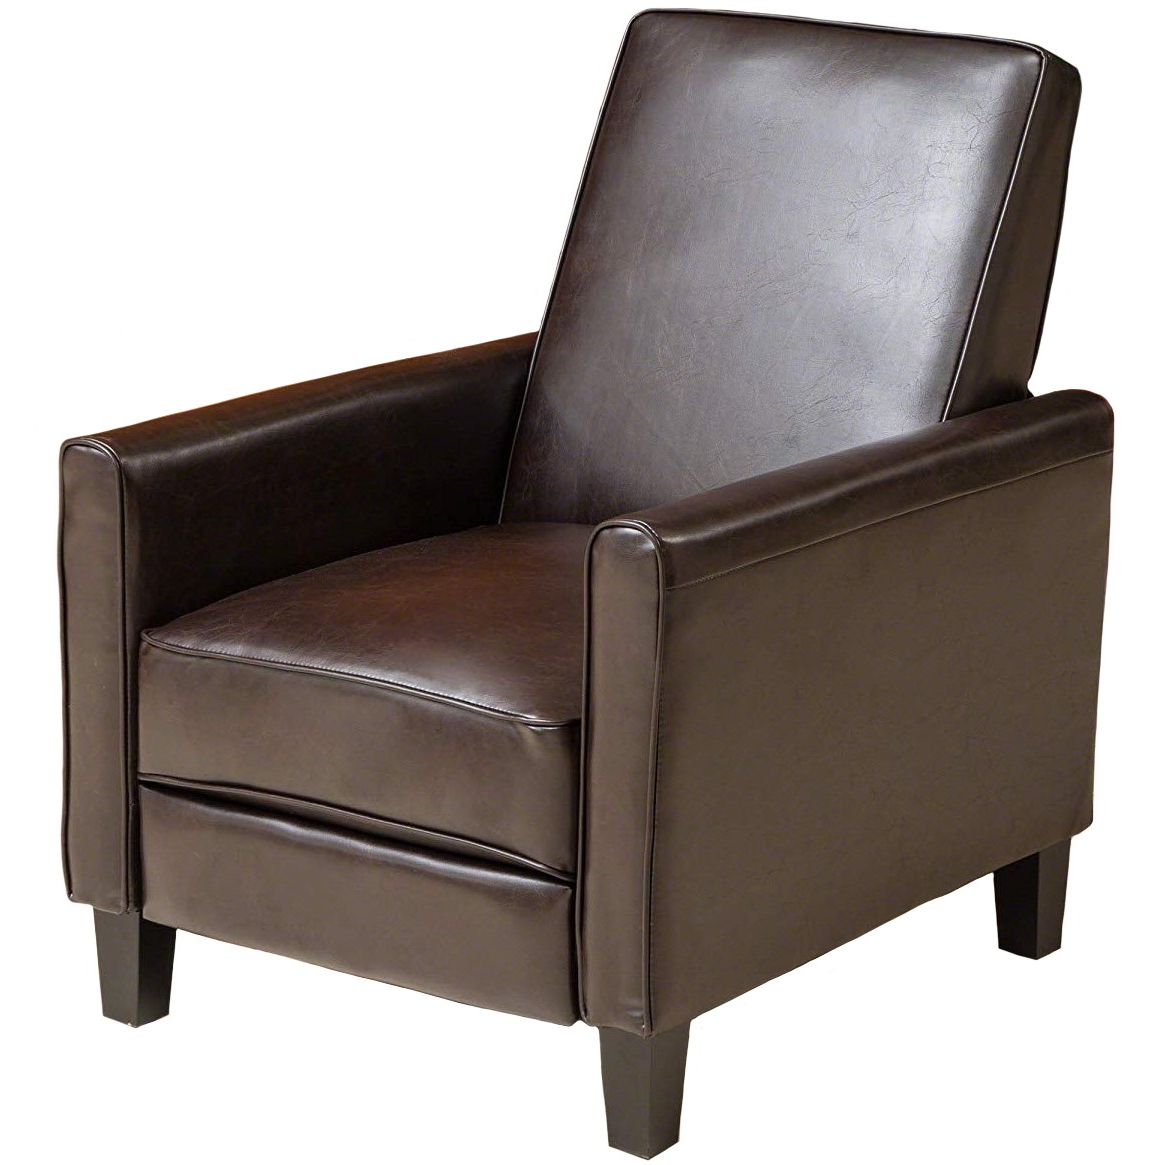 Christopher Knight Home Lucas Recliner Club Chair